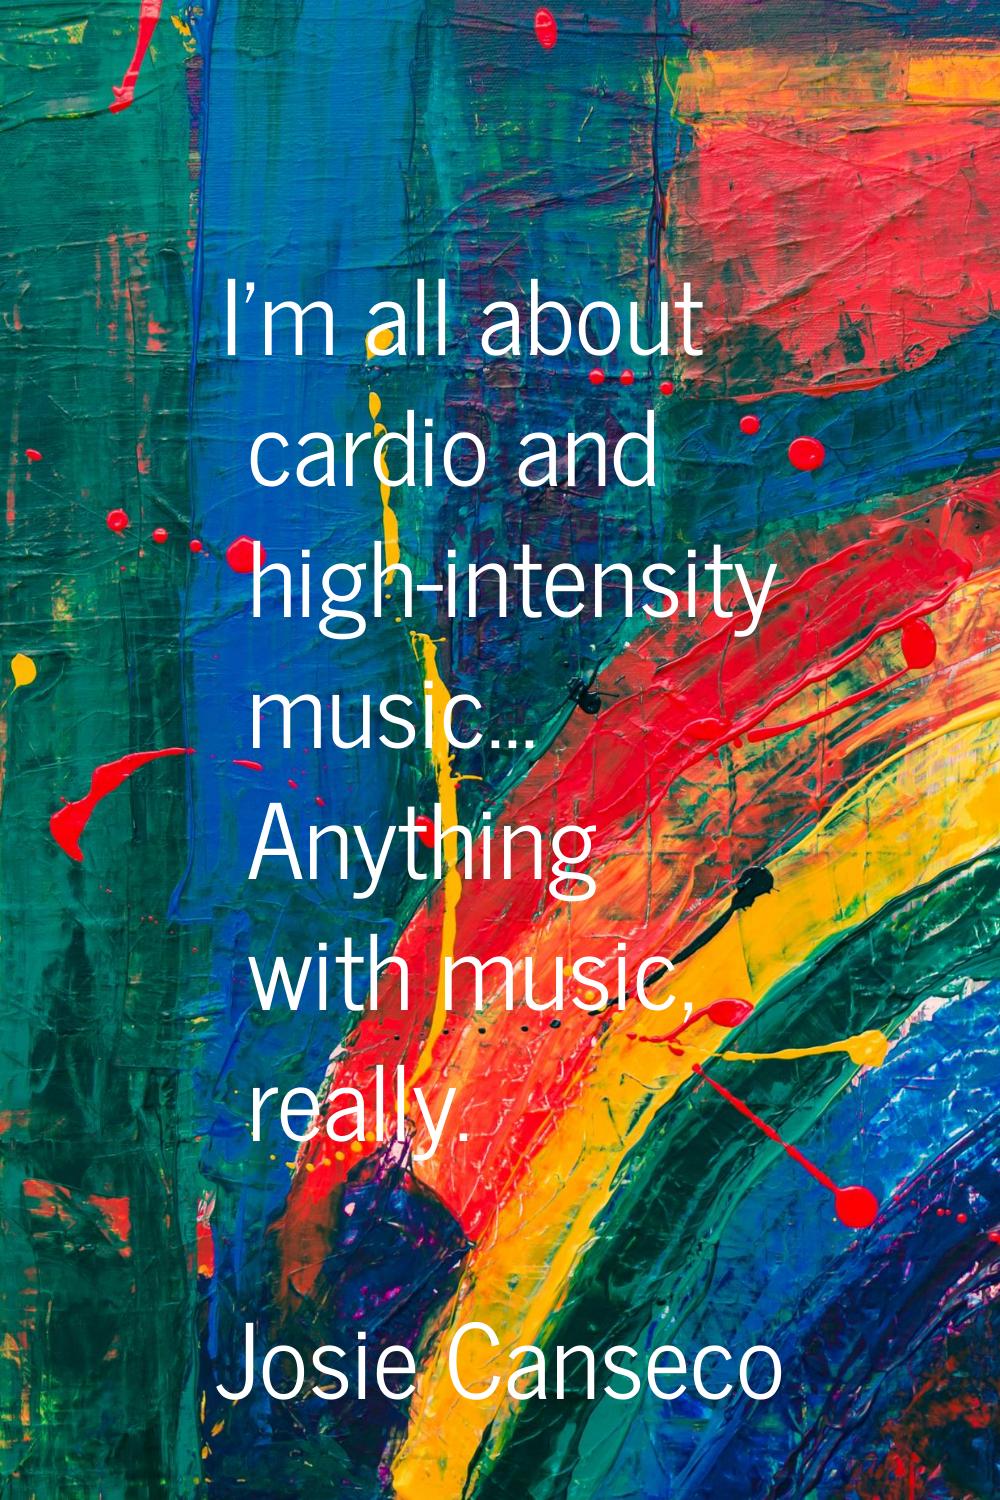 I'm all about cardio and high-intensity music... Anything with music, really.